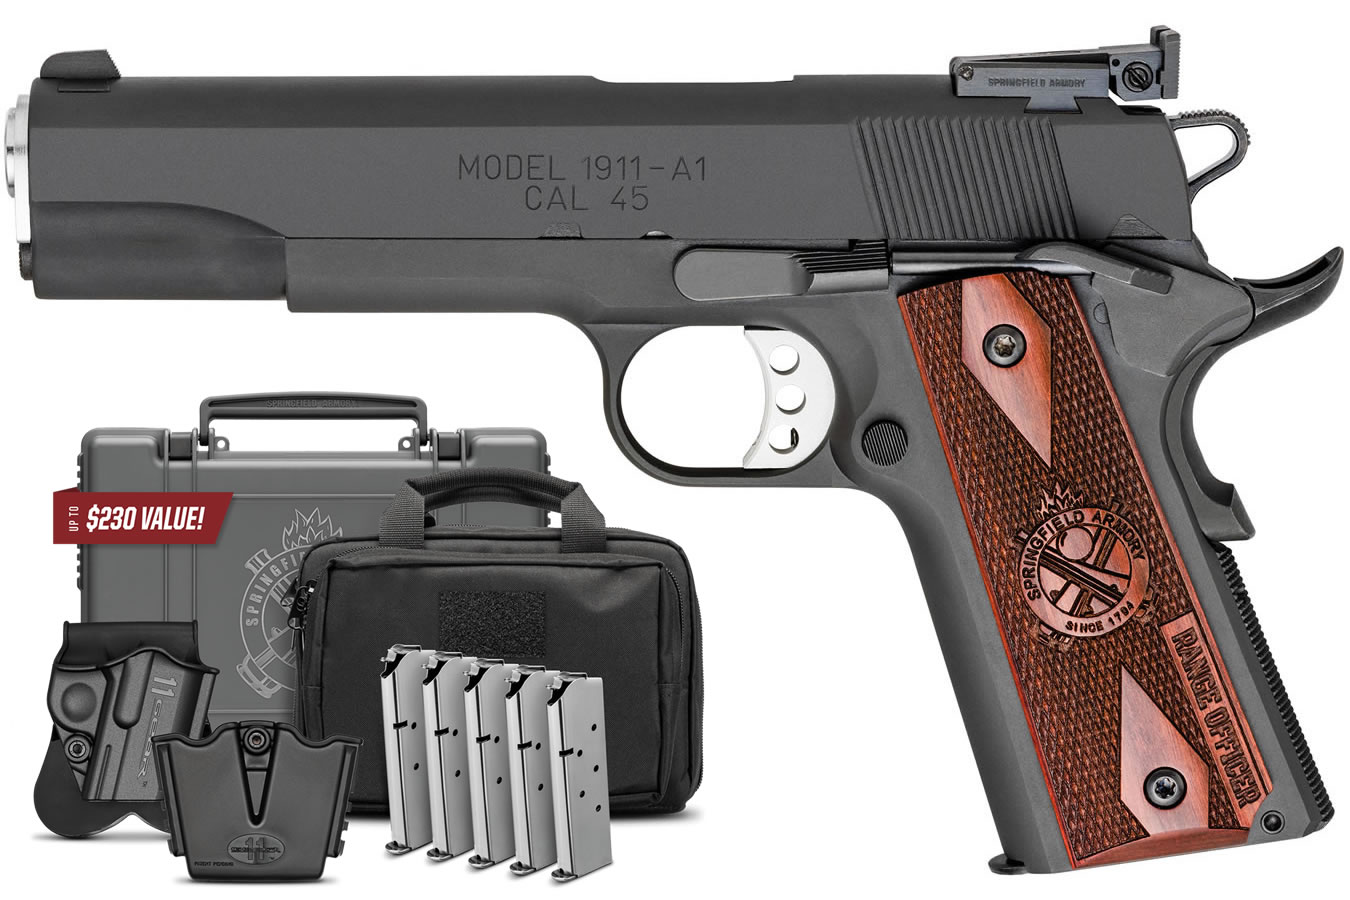 SPRINGFIELD 1911 RANGE OFFICER 45 ACP 5 IN BBL CARBON STEEL SLIDE AND FRAME GEAR UP PACKAGE